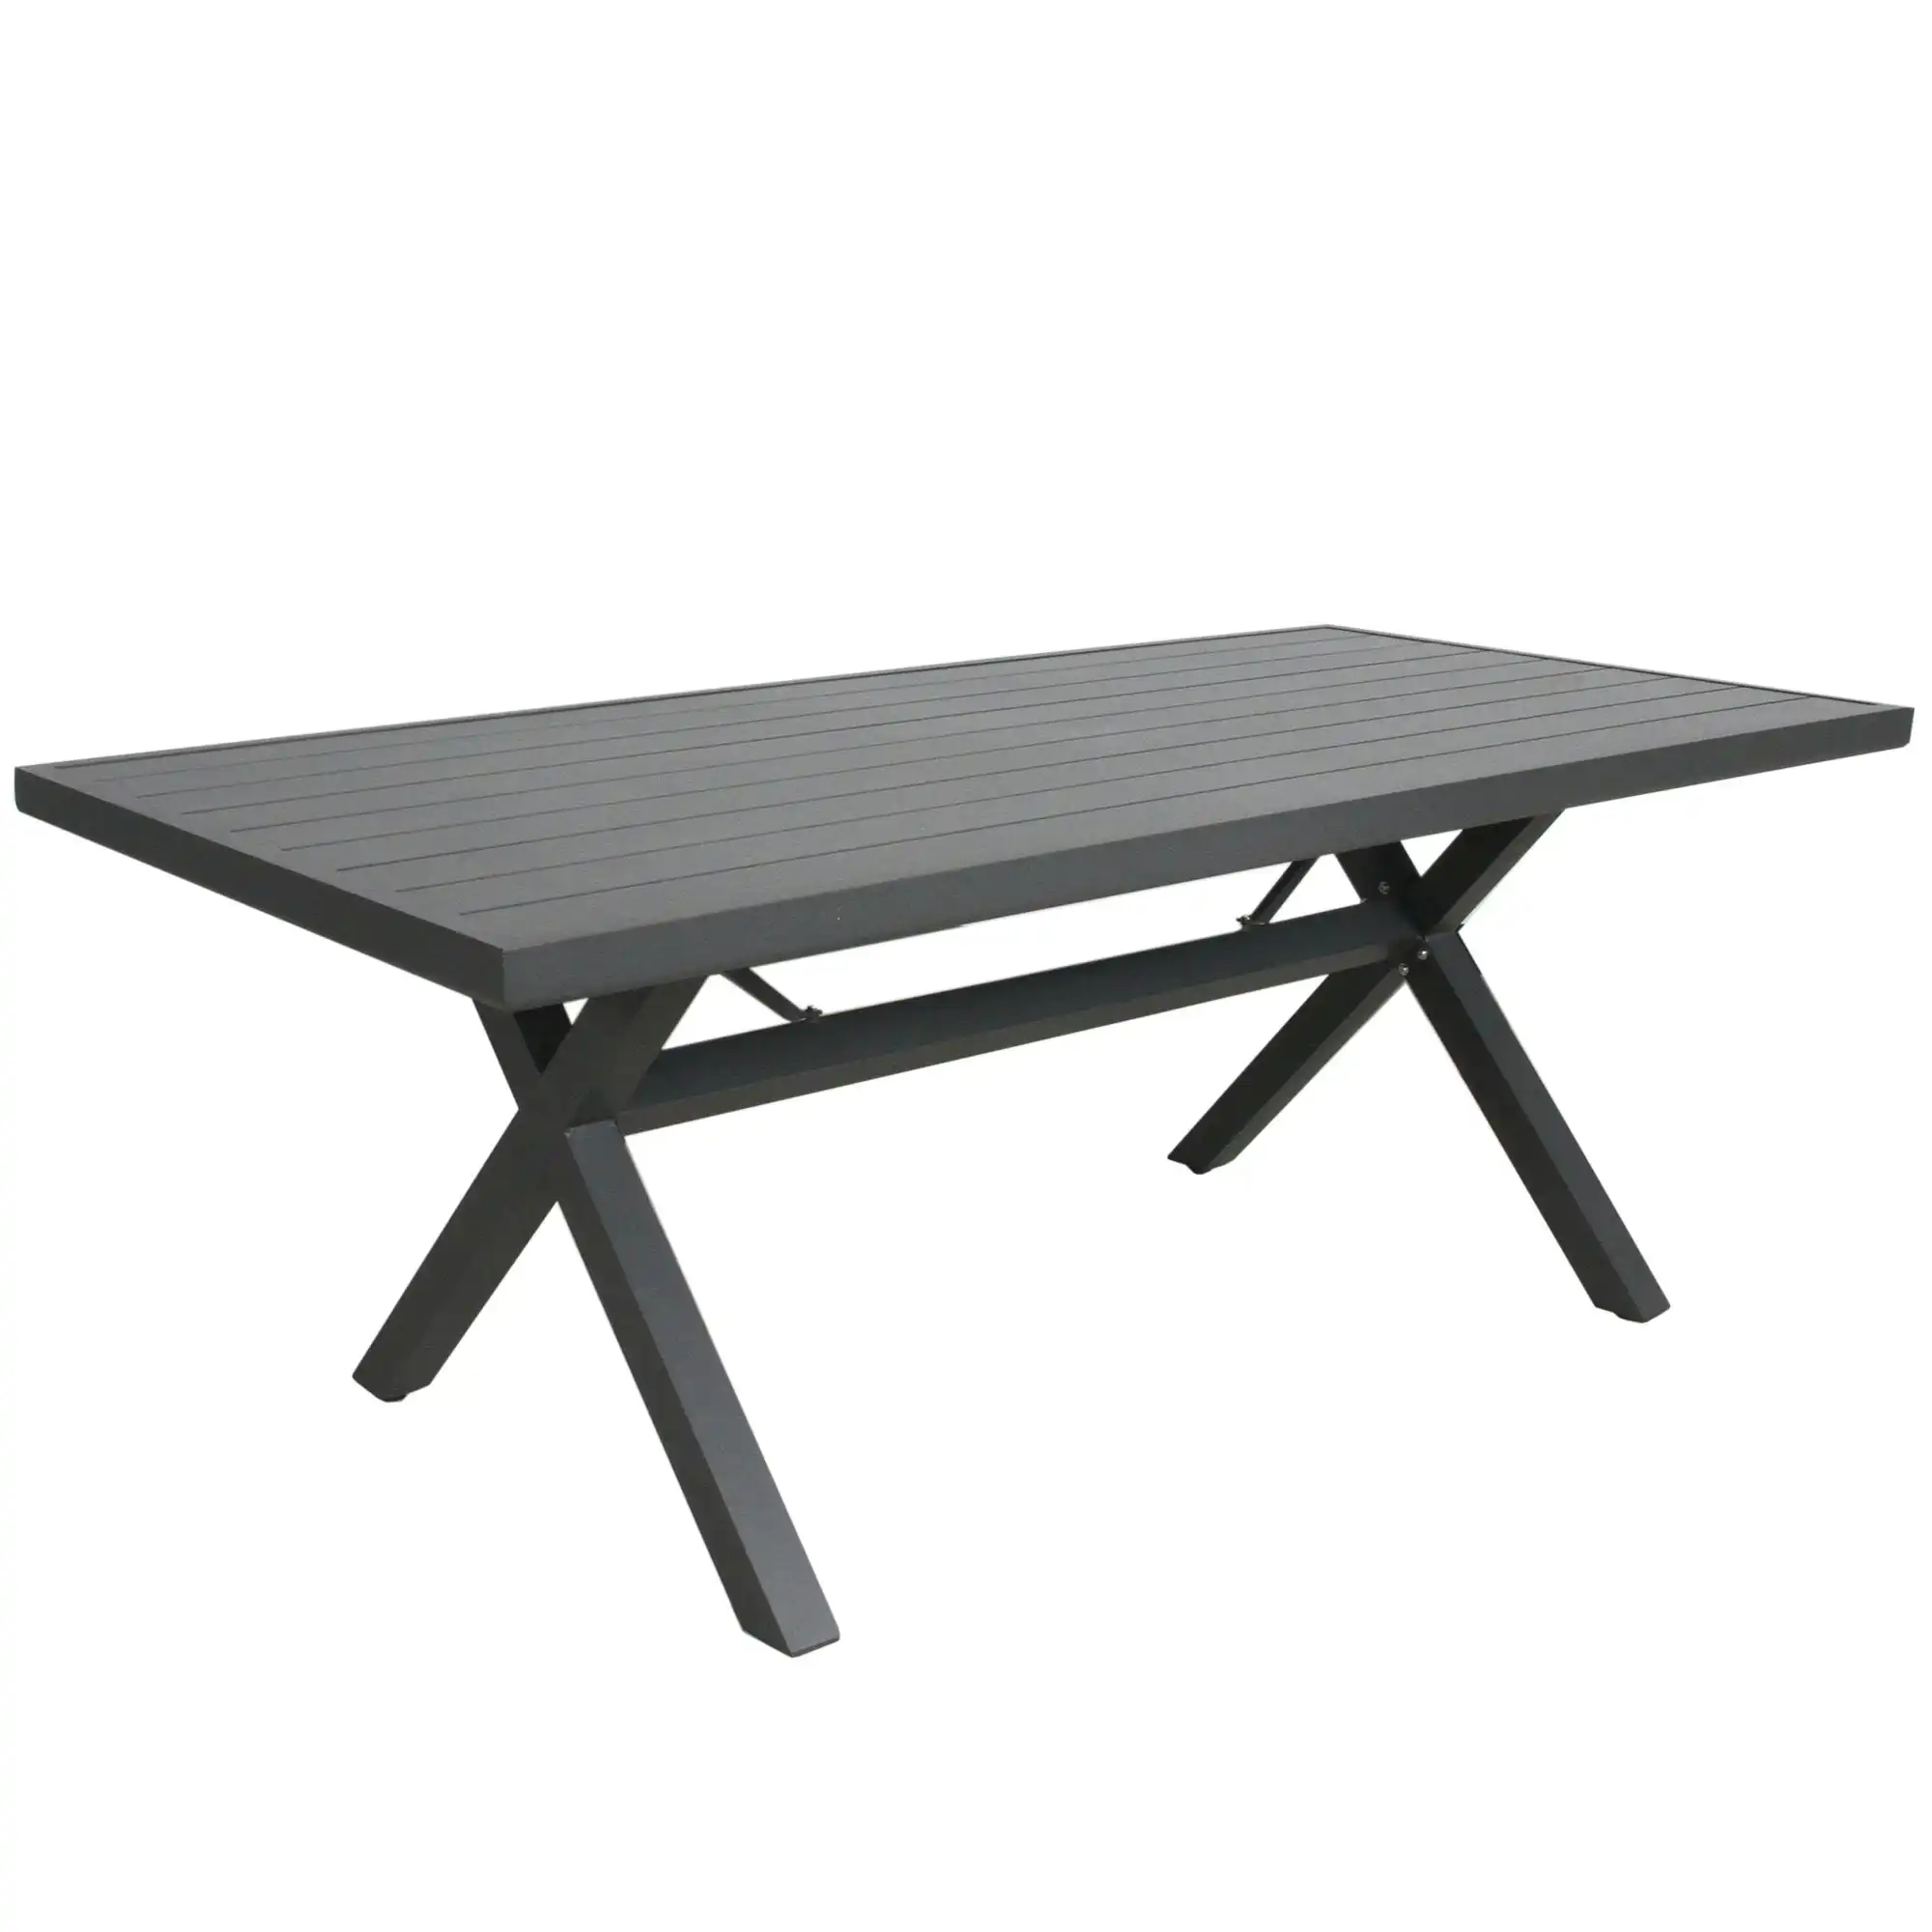 Percy 200cm Outdoor Dining Table